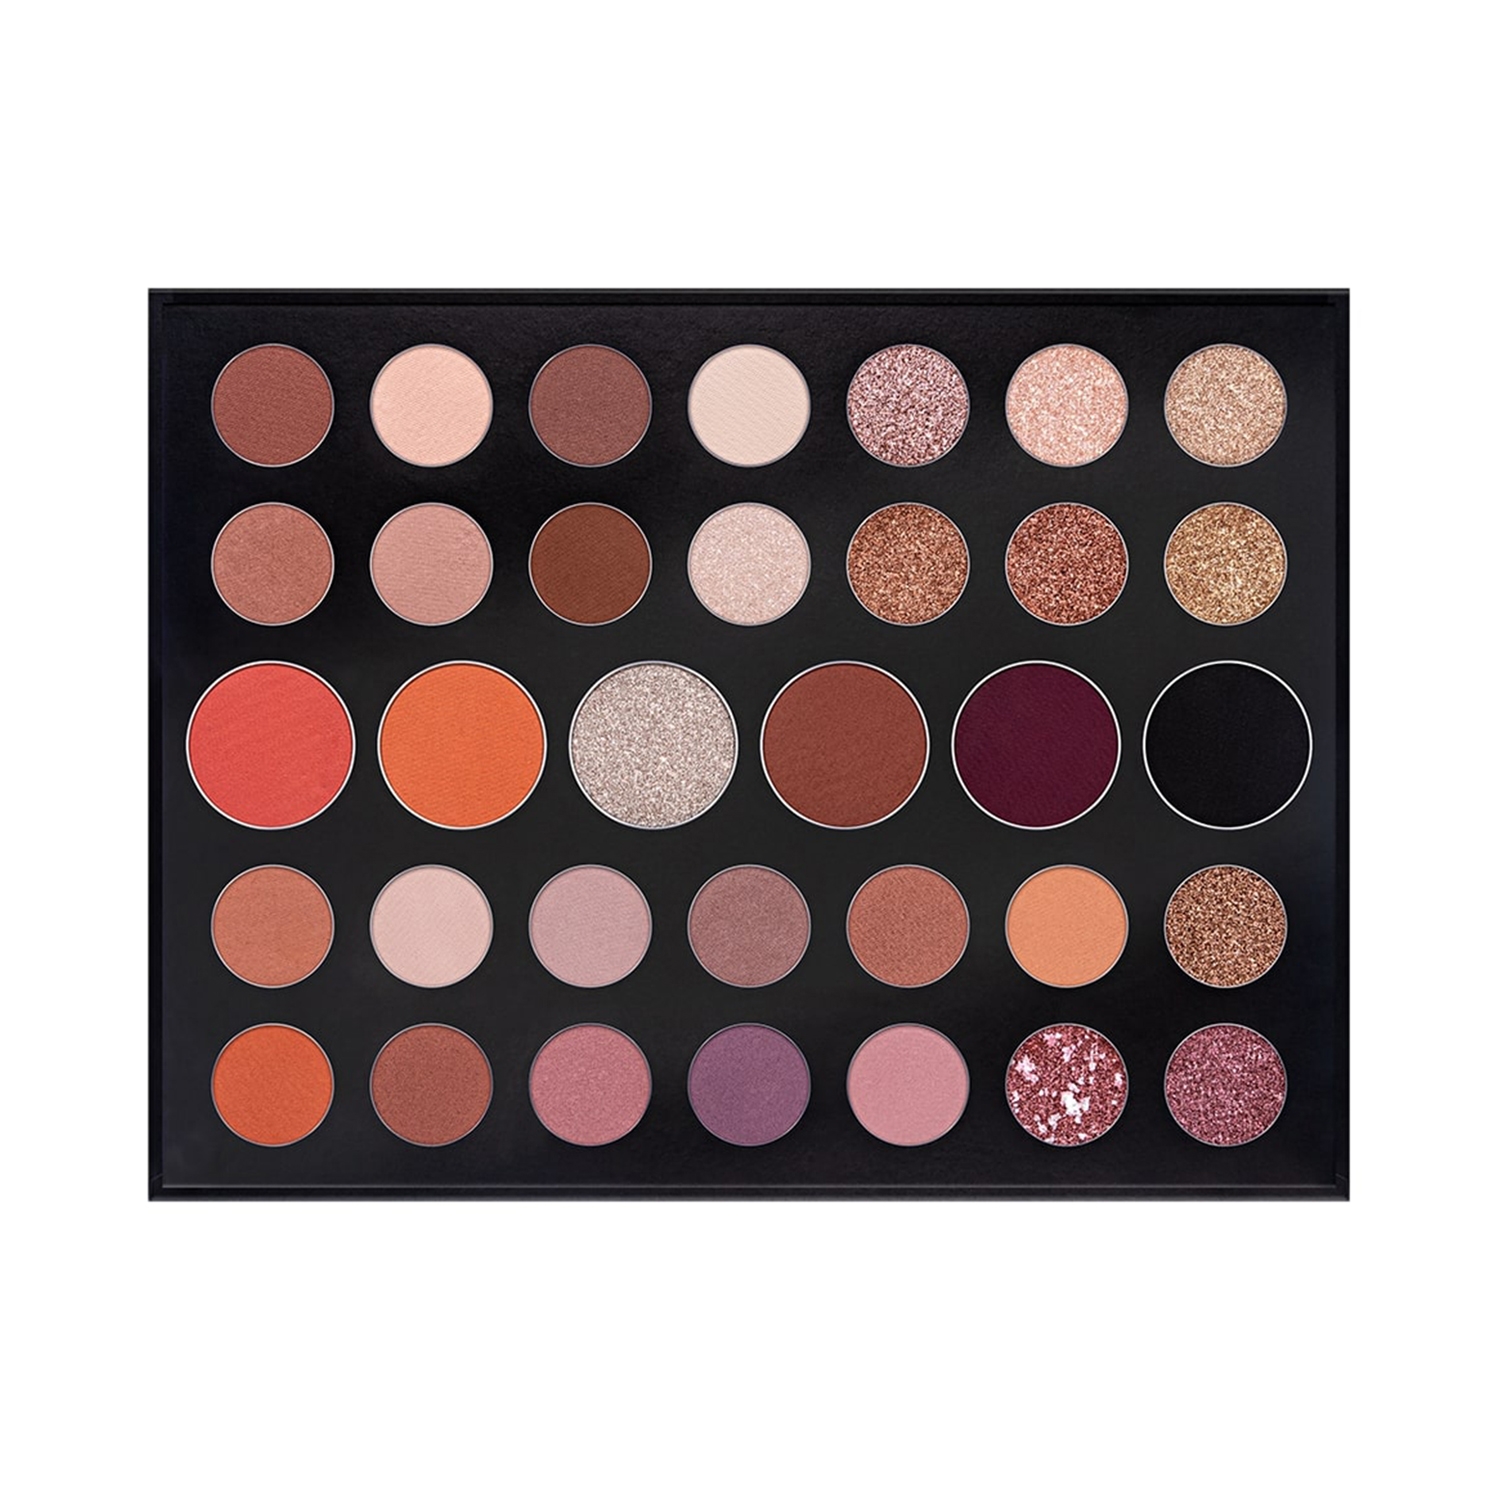 Daily Life Forever52 | Daily Life Forever52 Infinite 34 Color Eyeshadow Palette IEB002 - Multi Color (70.2g)